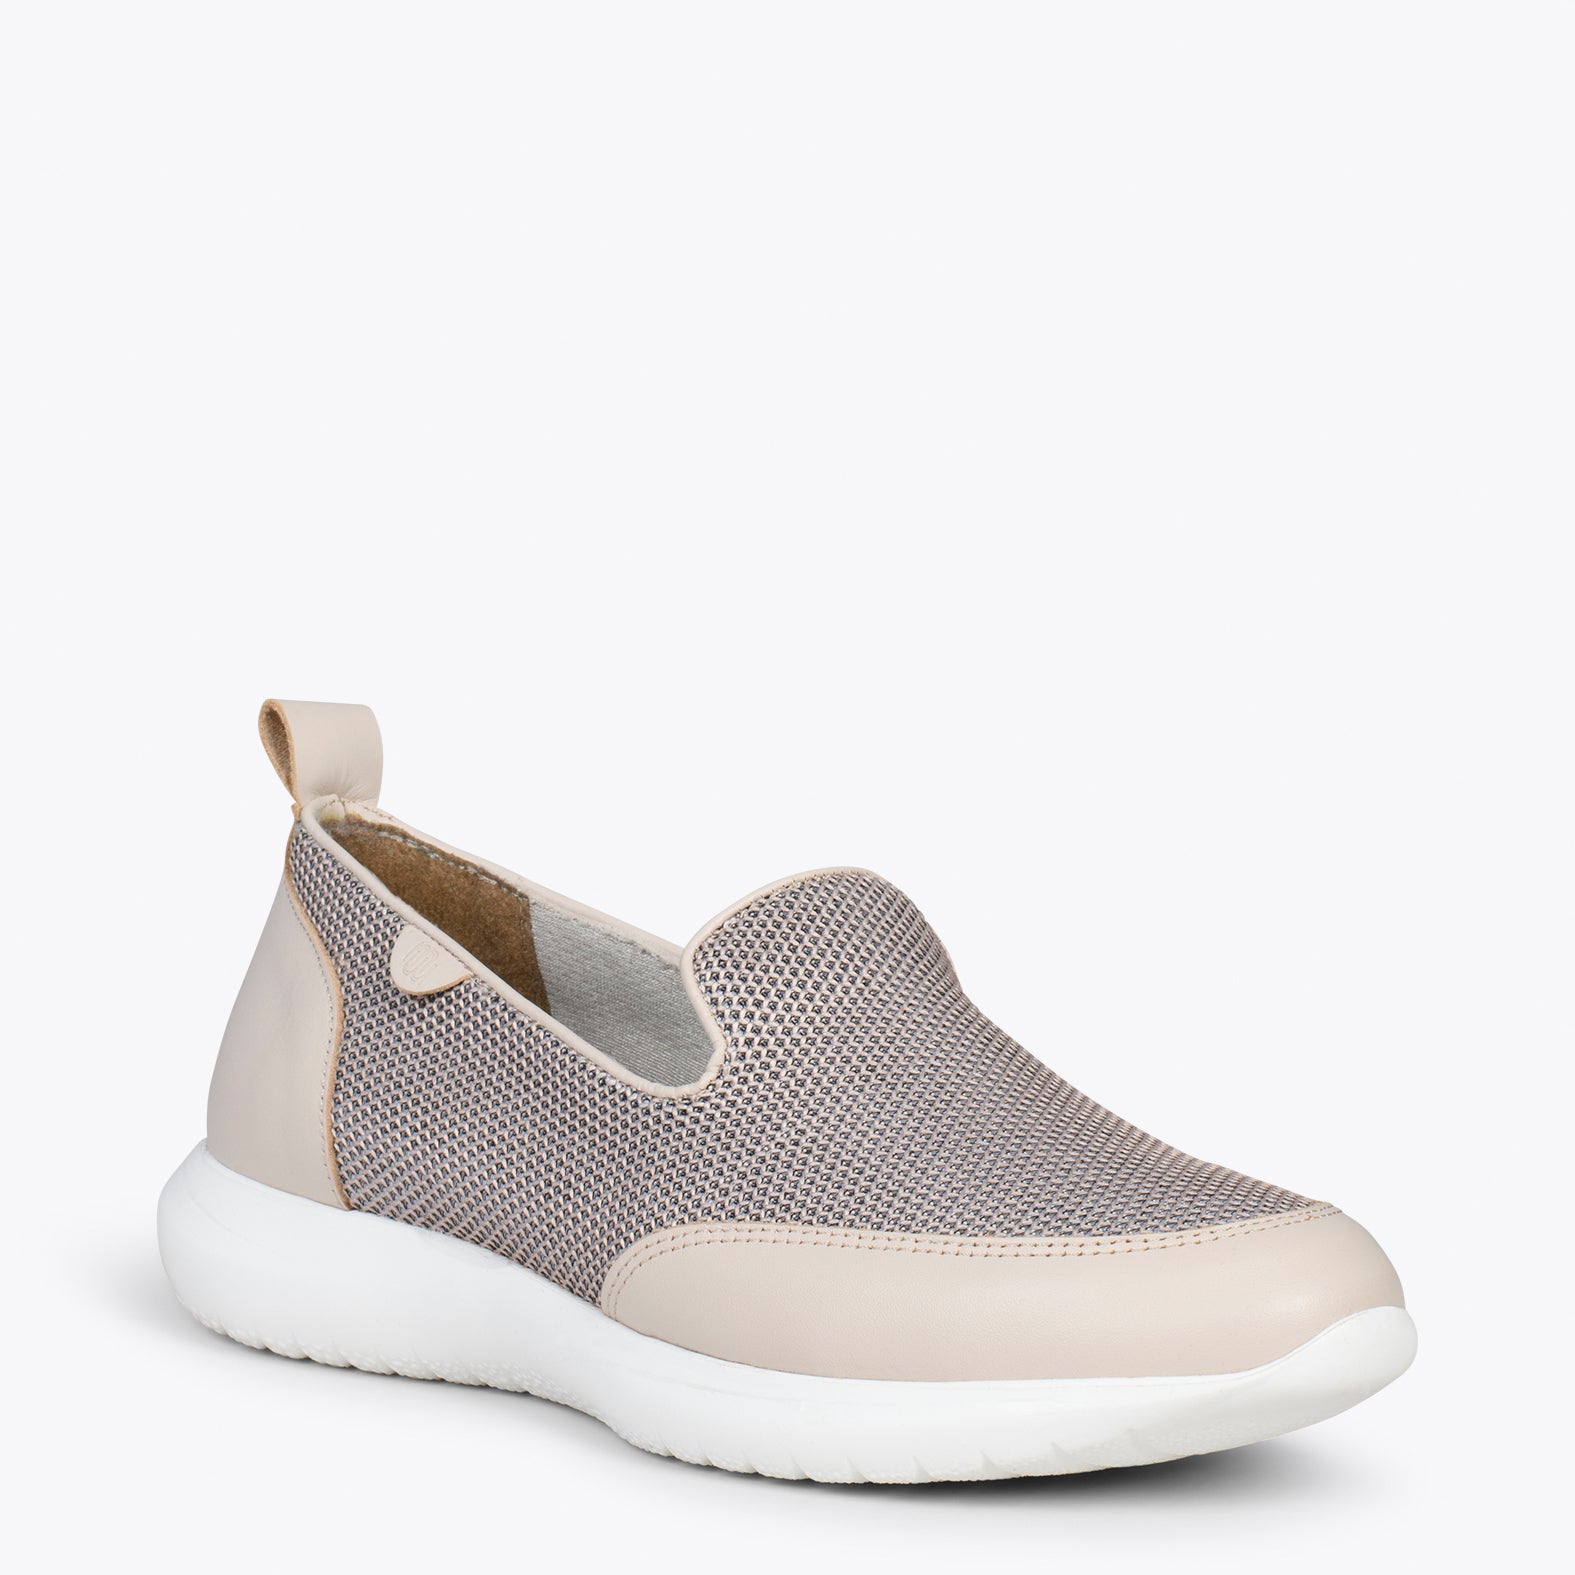 SLIPPER SPORT – BEIGE sneakers with no laces and mesh design